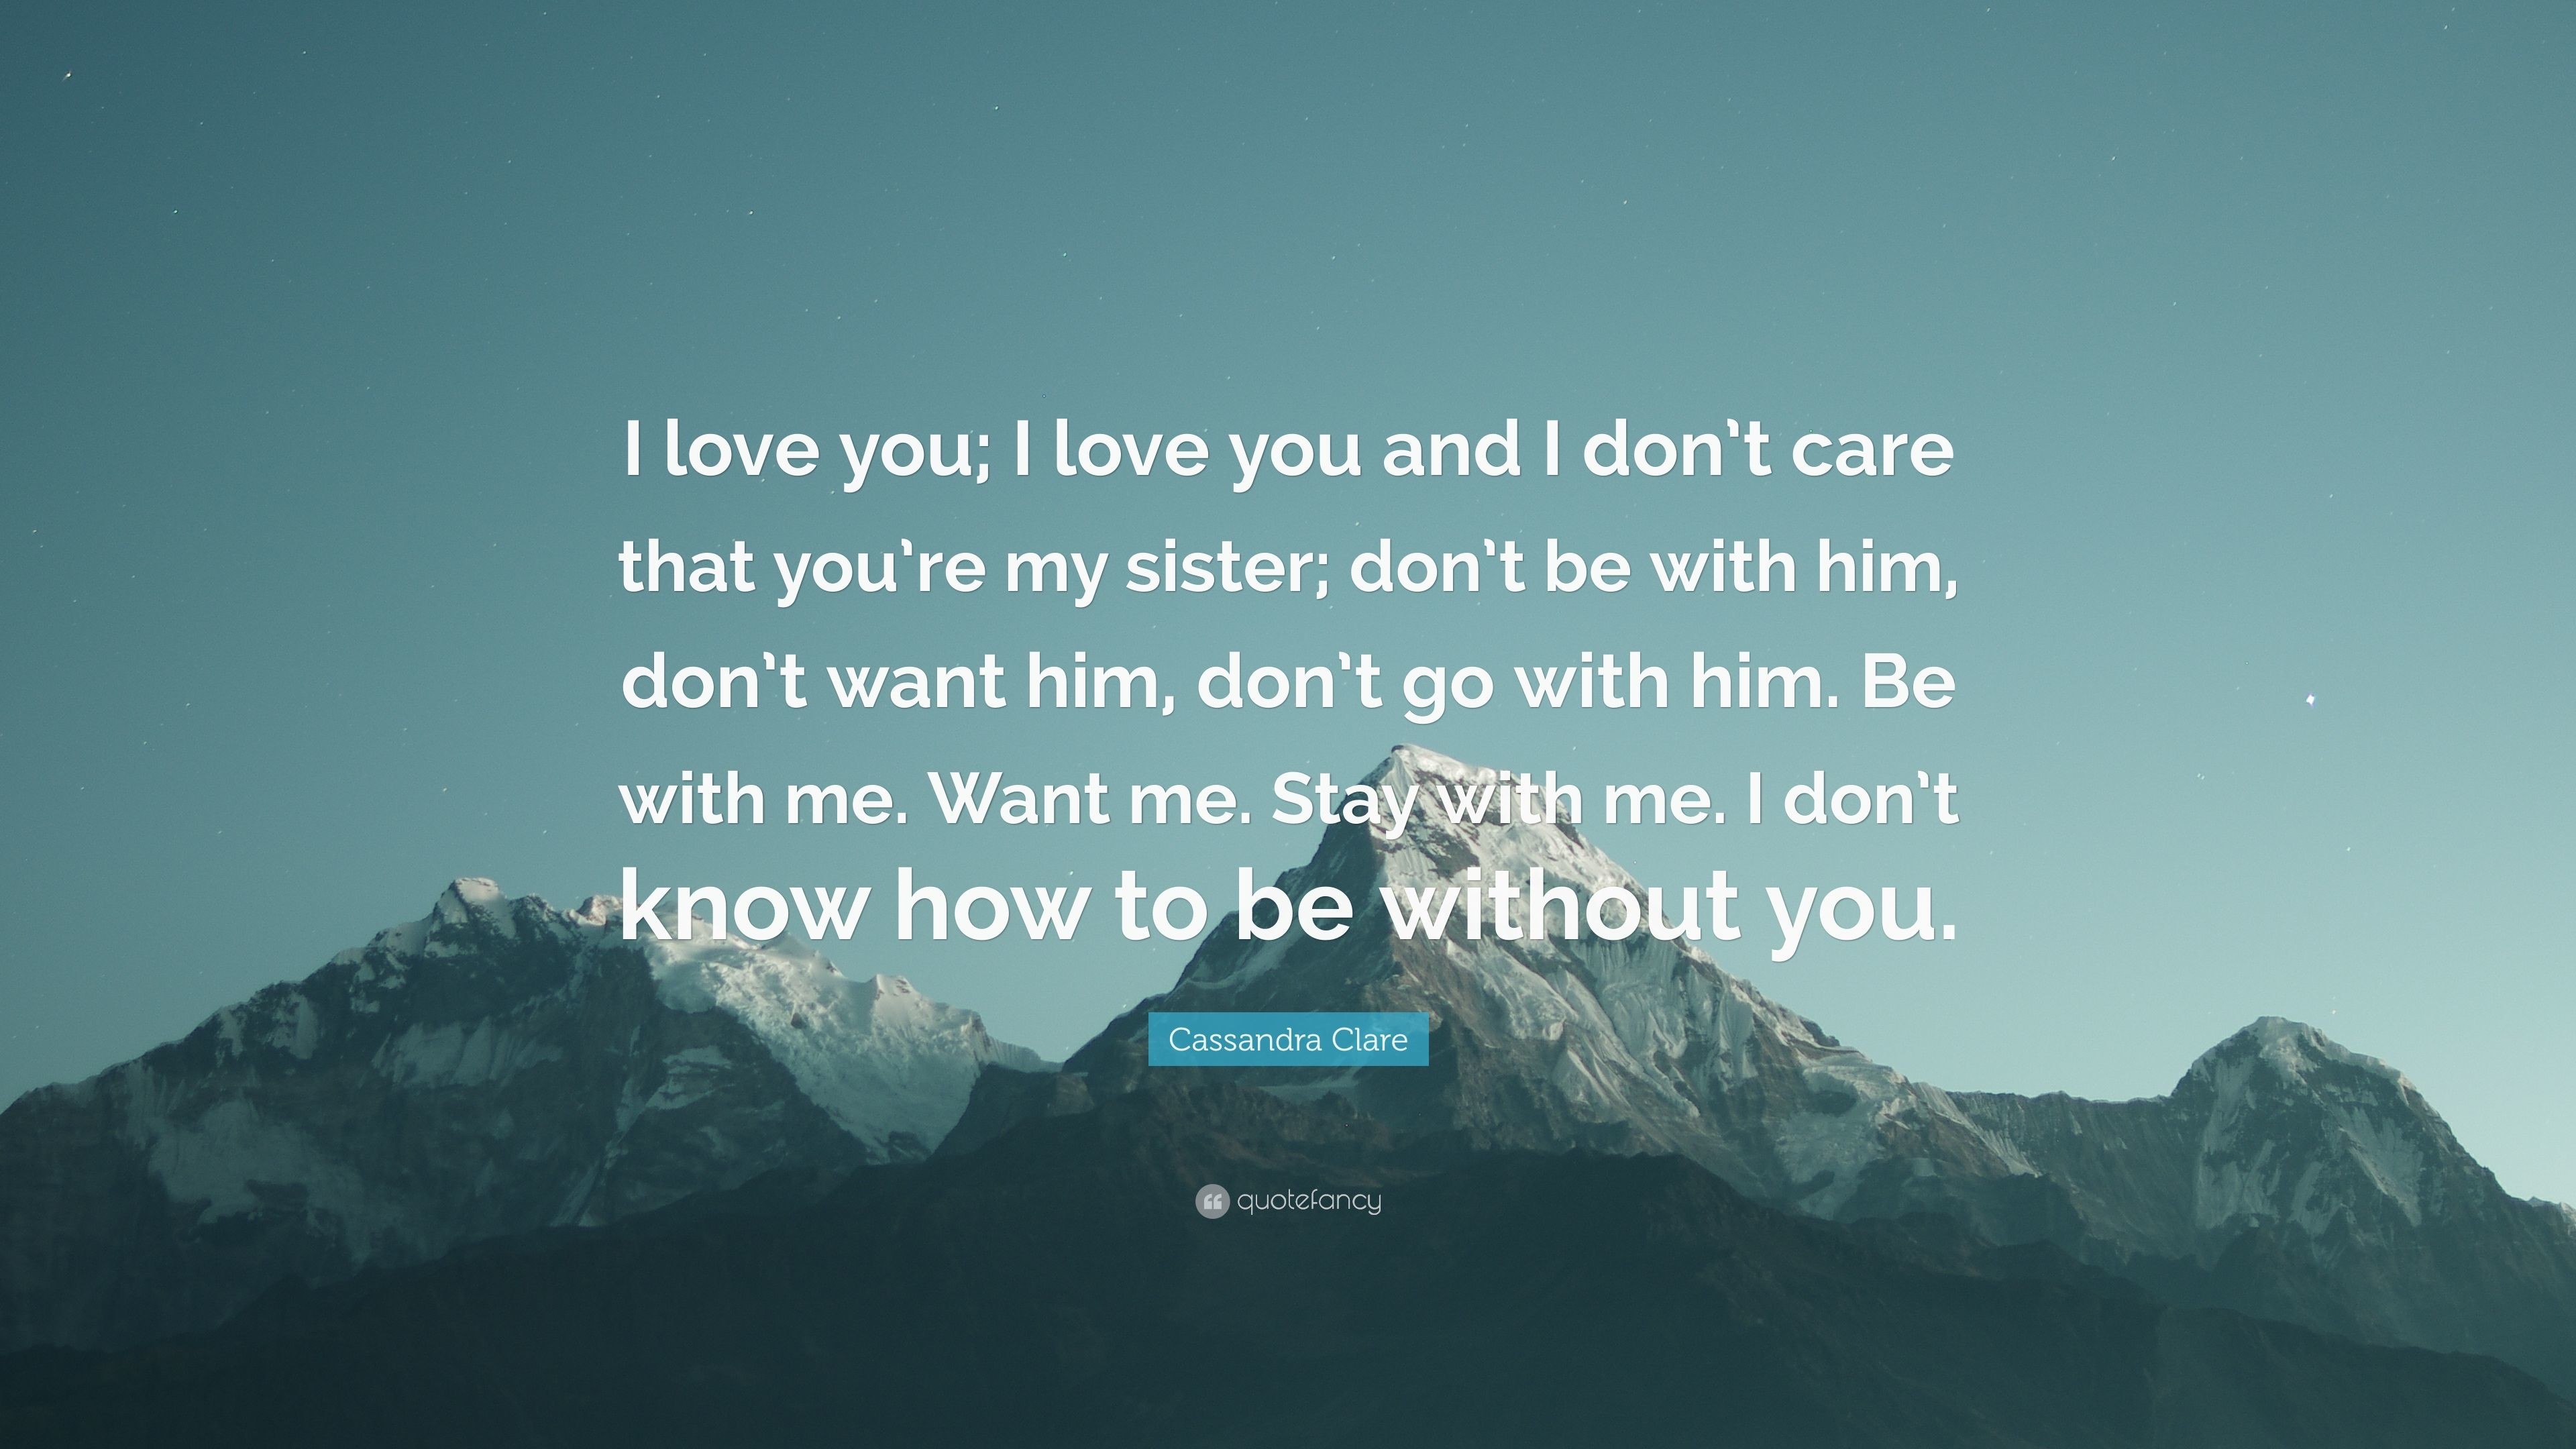 3840x2160 Cassandra Clare Quote: “I love you; I love you and I don'